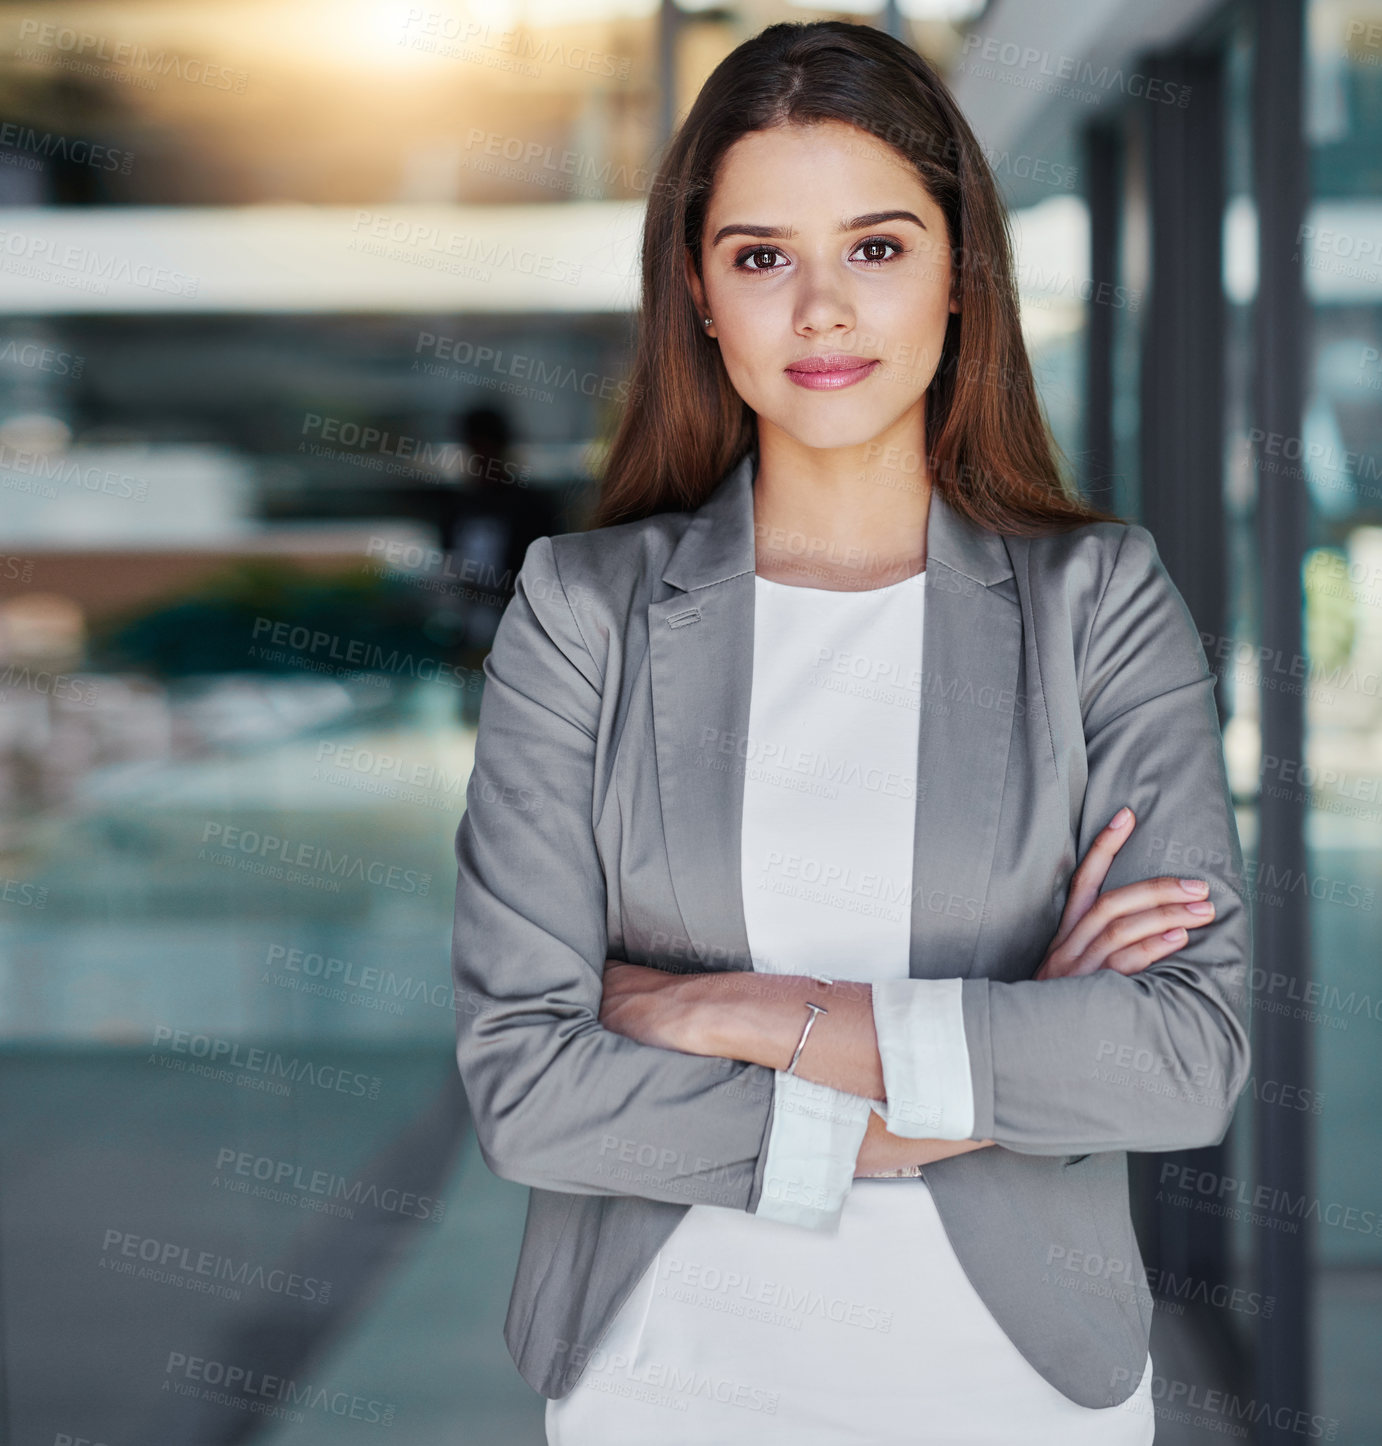 Buy stock photo Portrait of an attractive young businesswoman standing with her arms crossed in the office